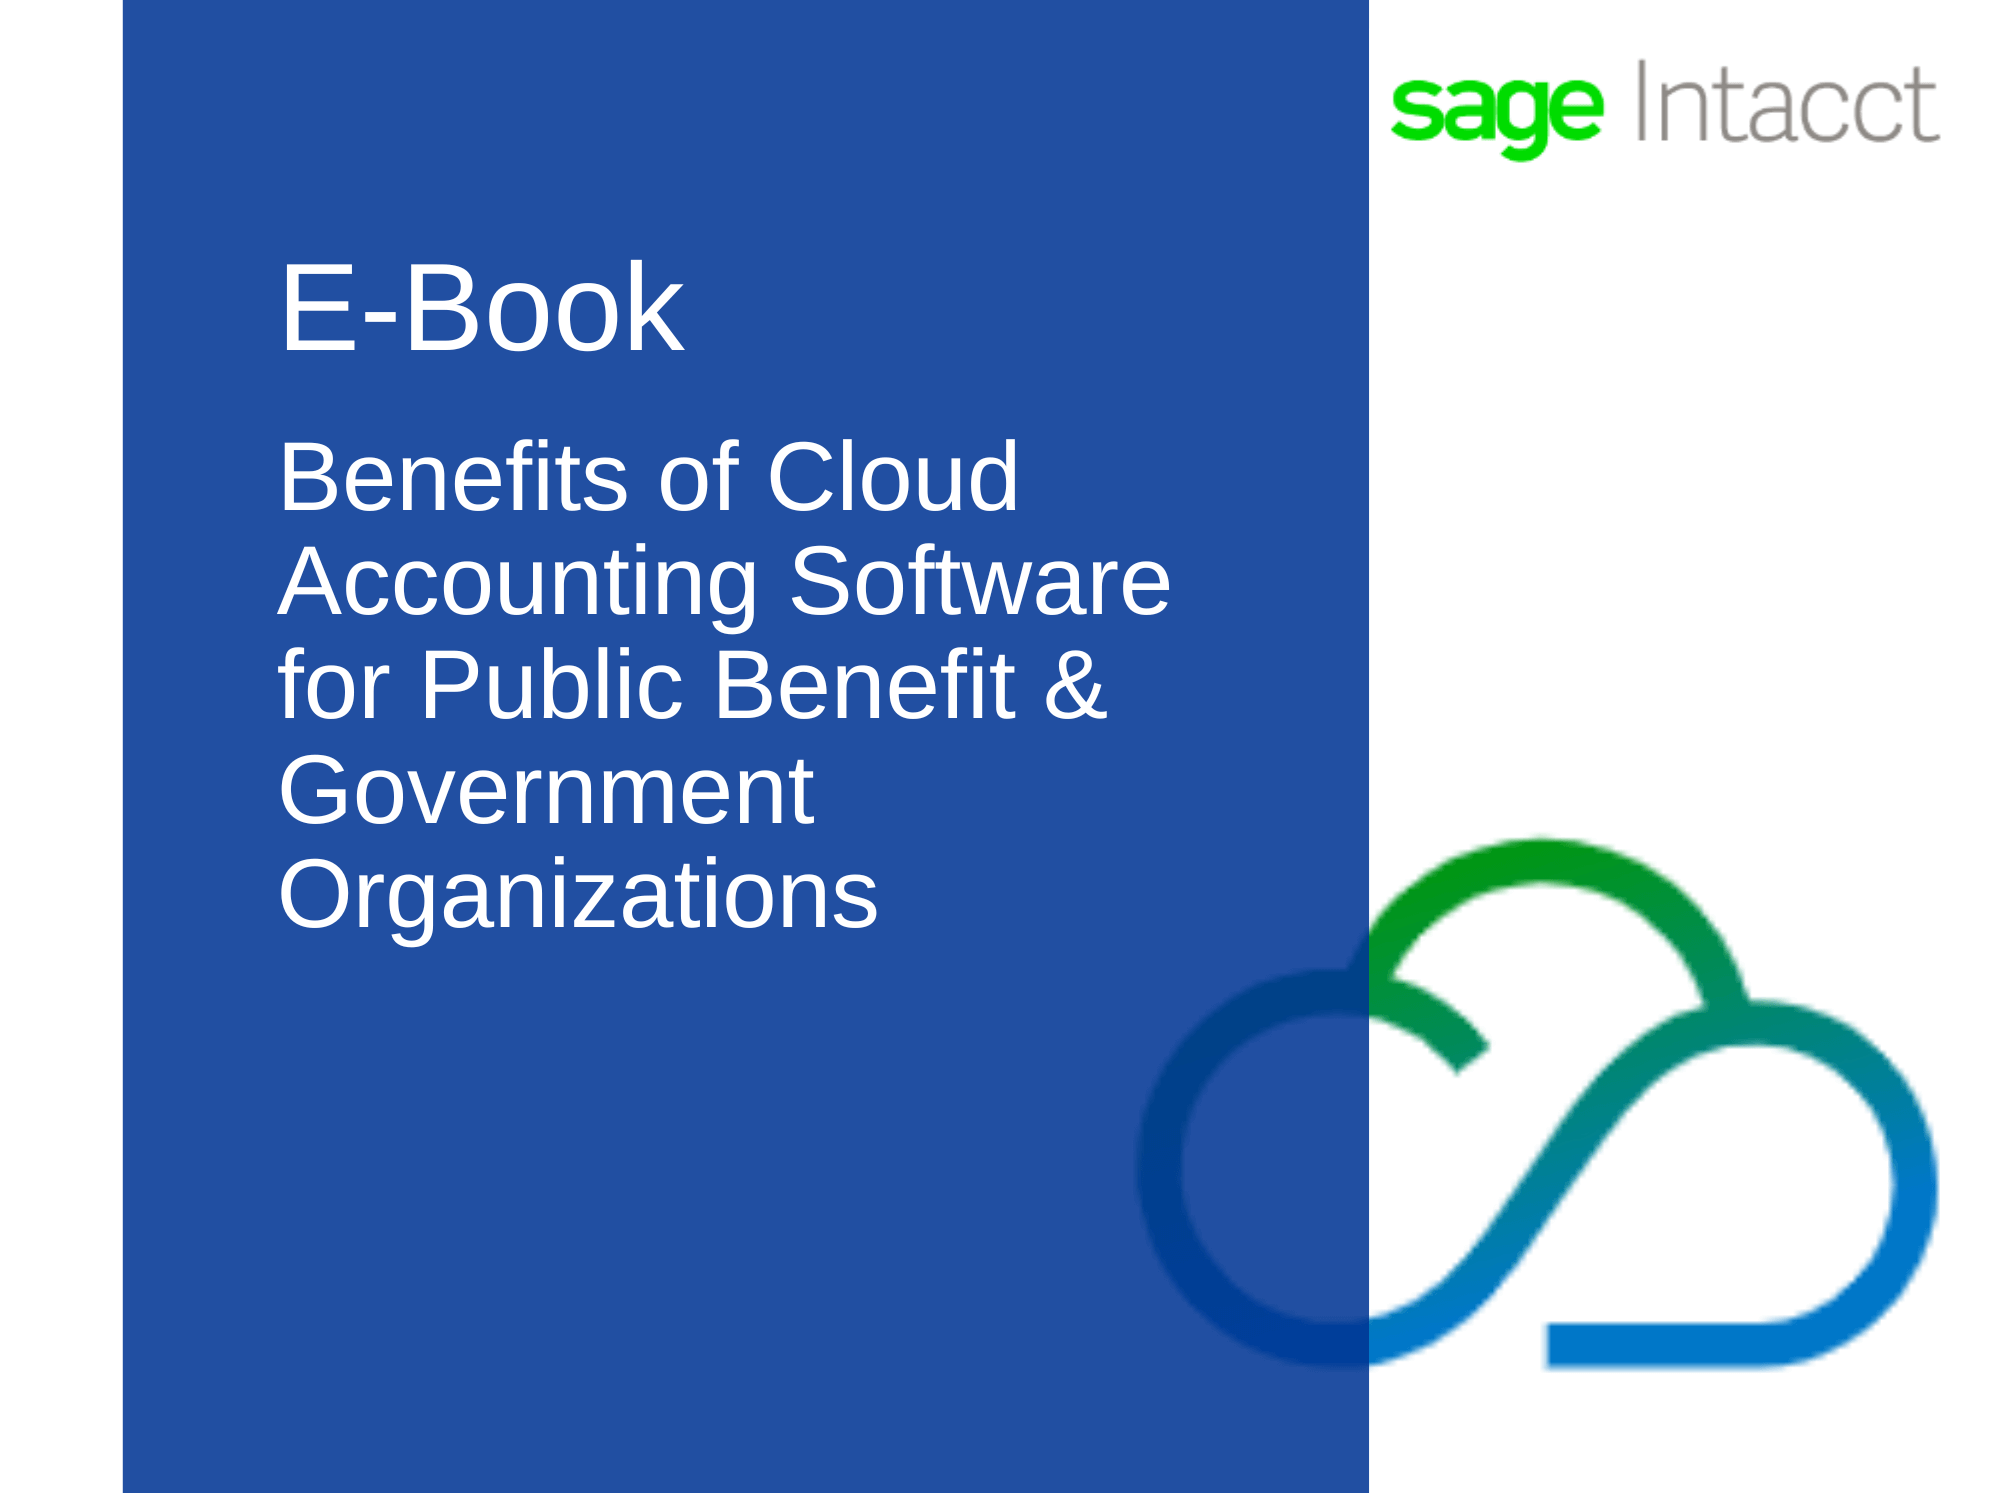 Sage Intacct E-Book: Benefits of Cloud Accounting Software for Public Benefit and Government Organizations